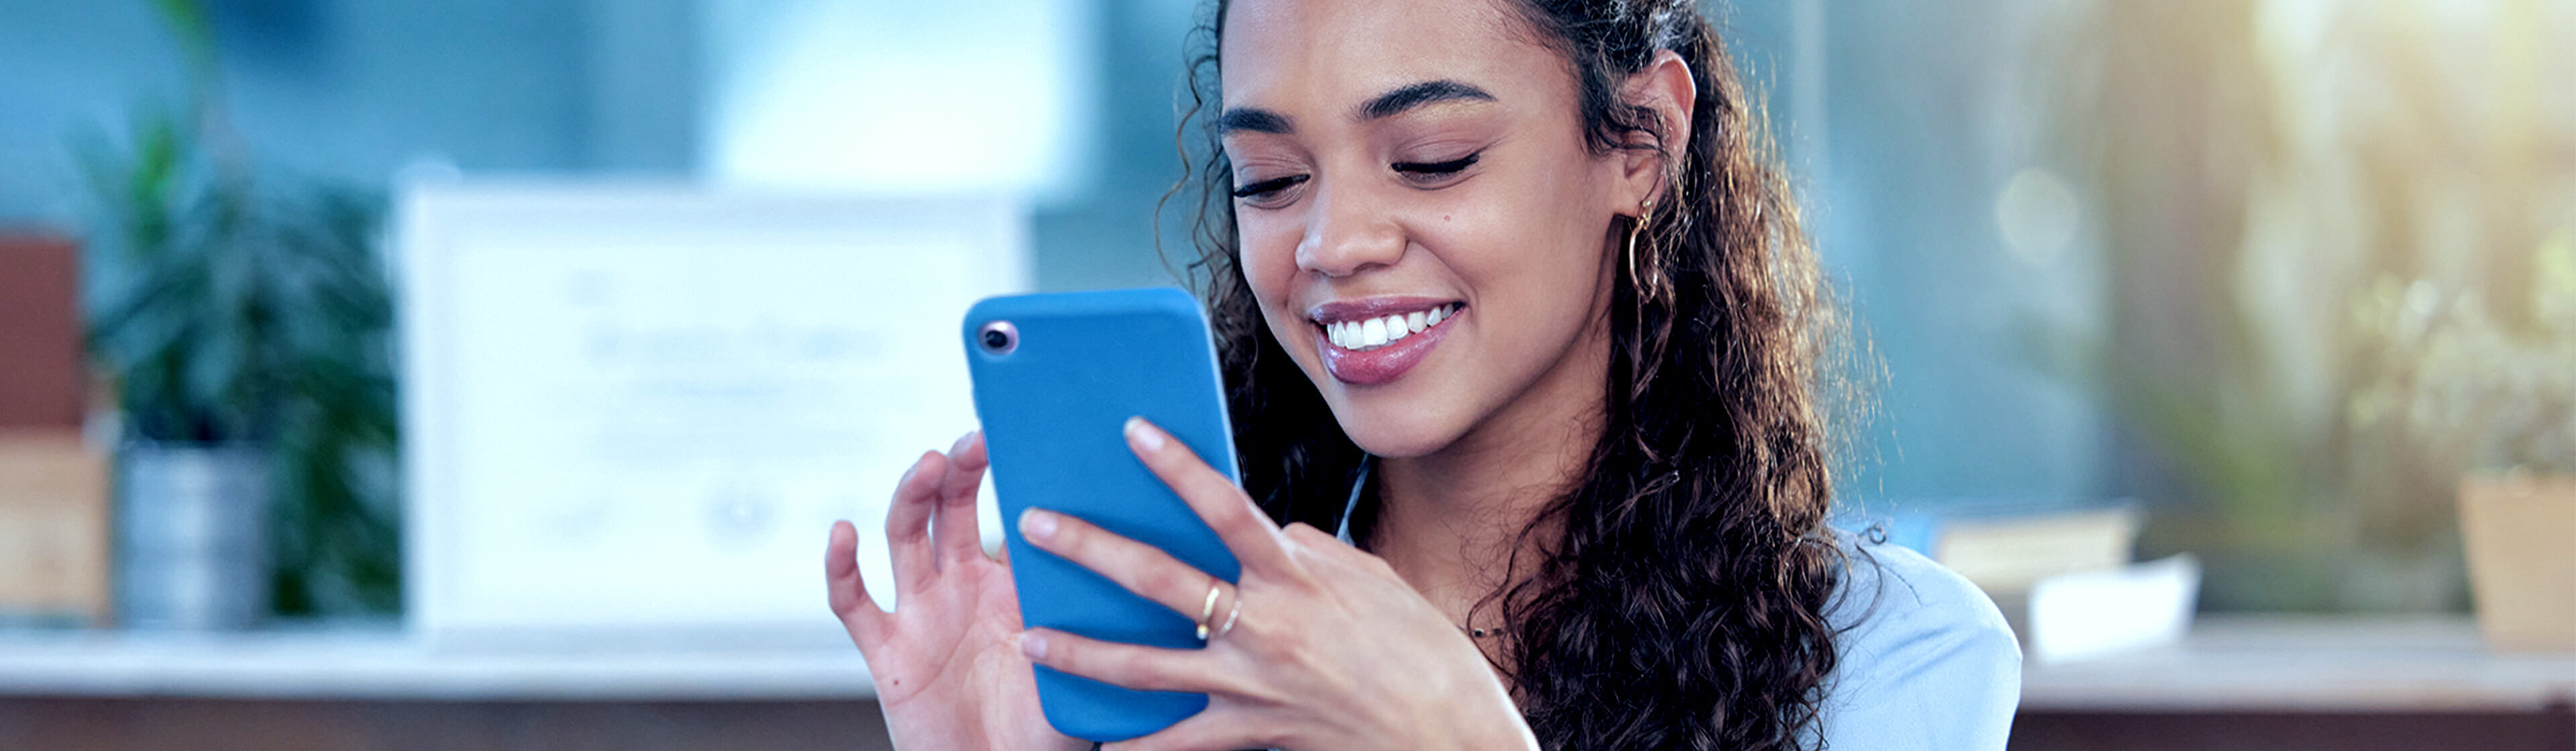 A smiling young women using a smartphone working at a desk